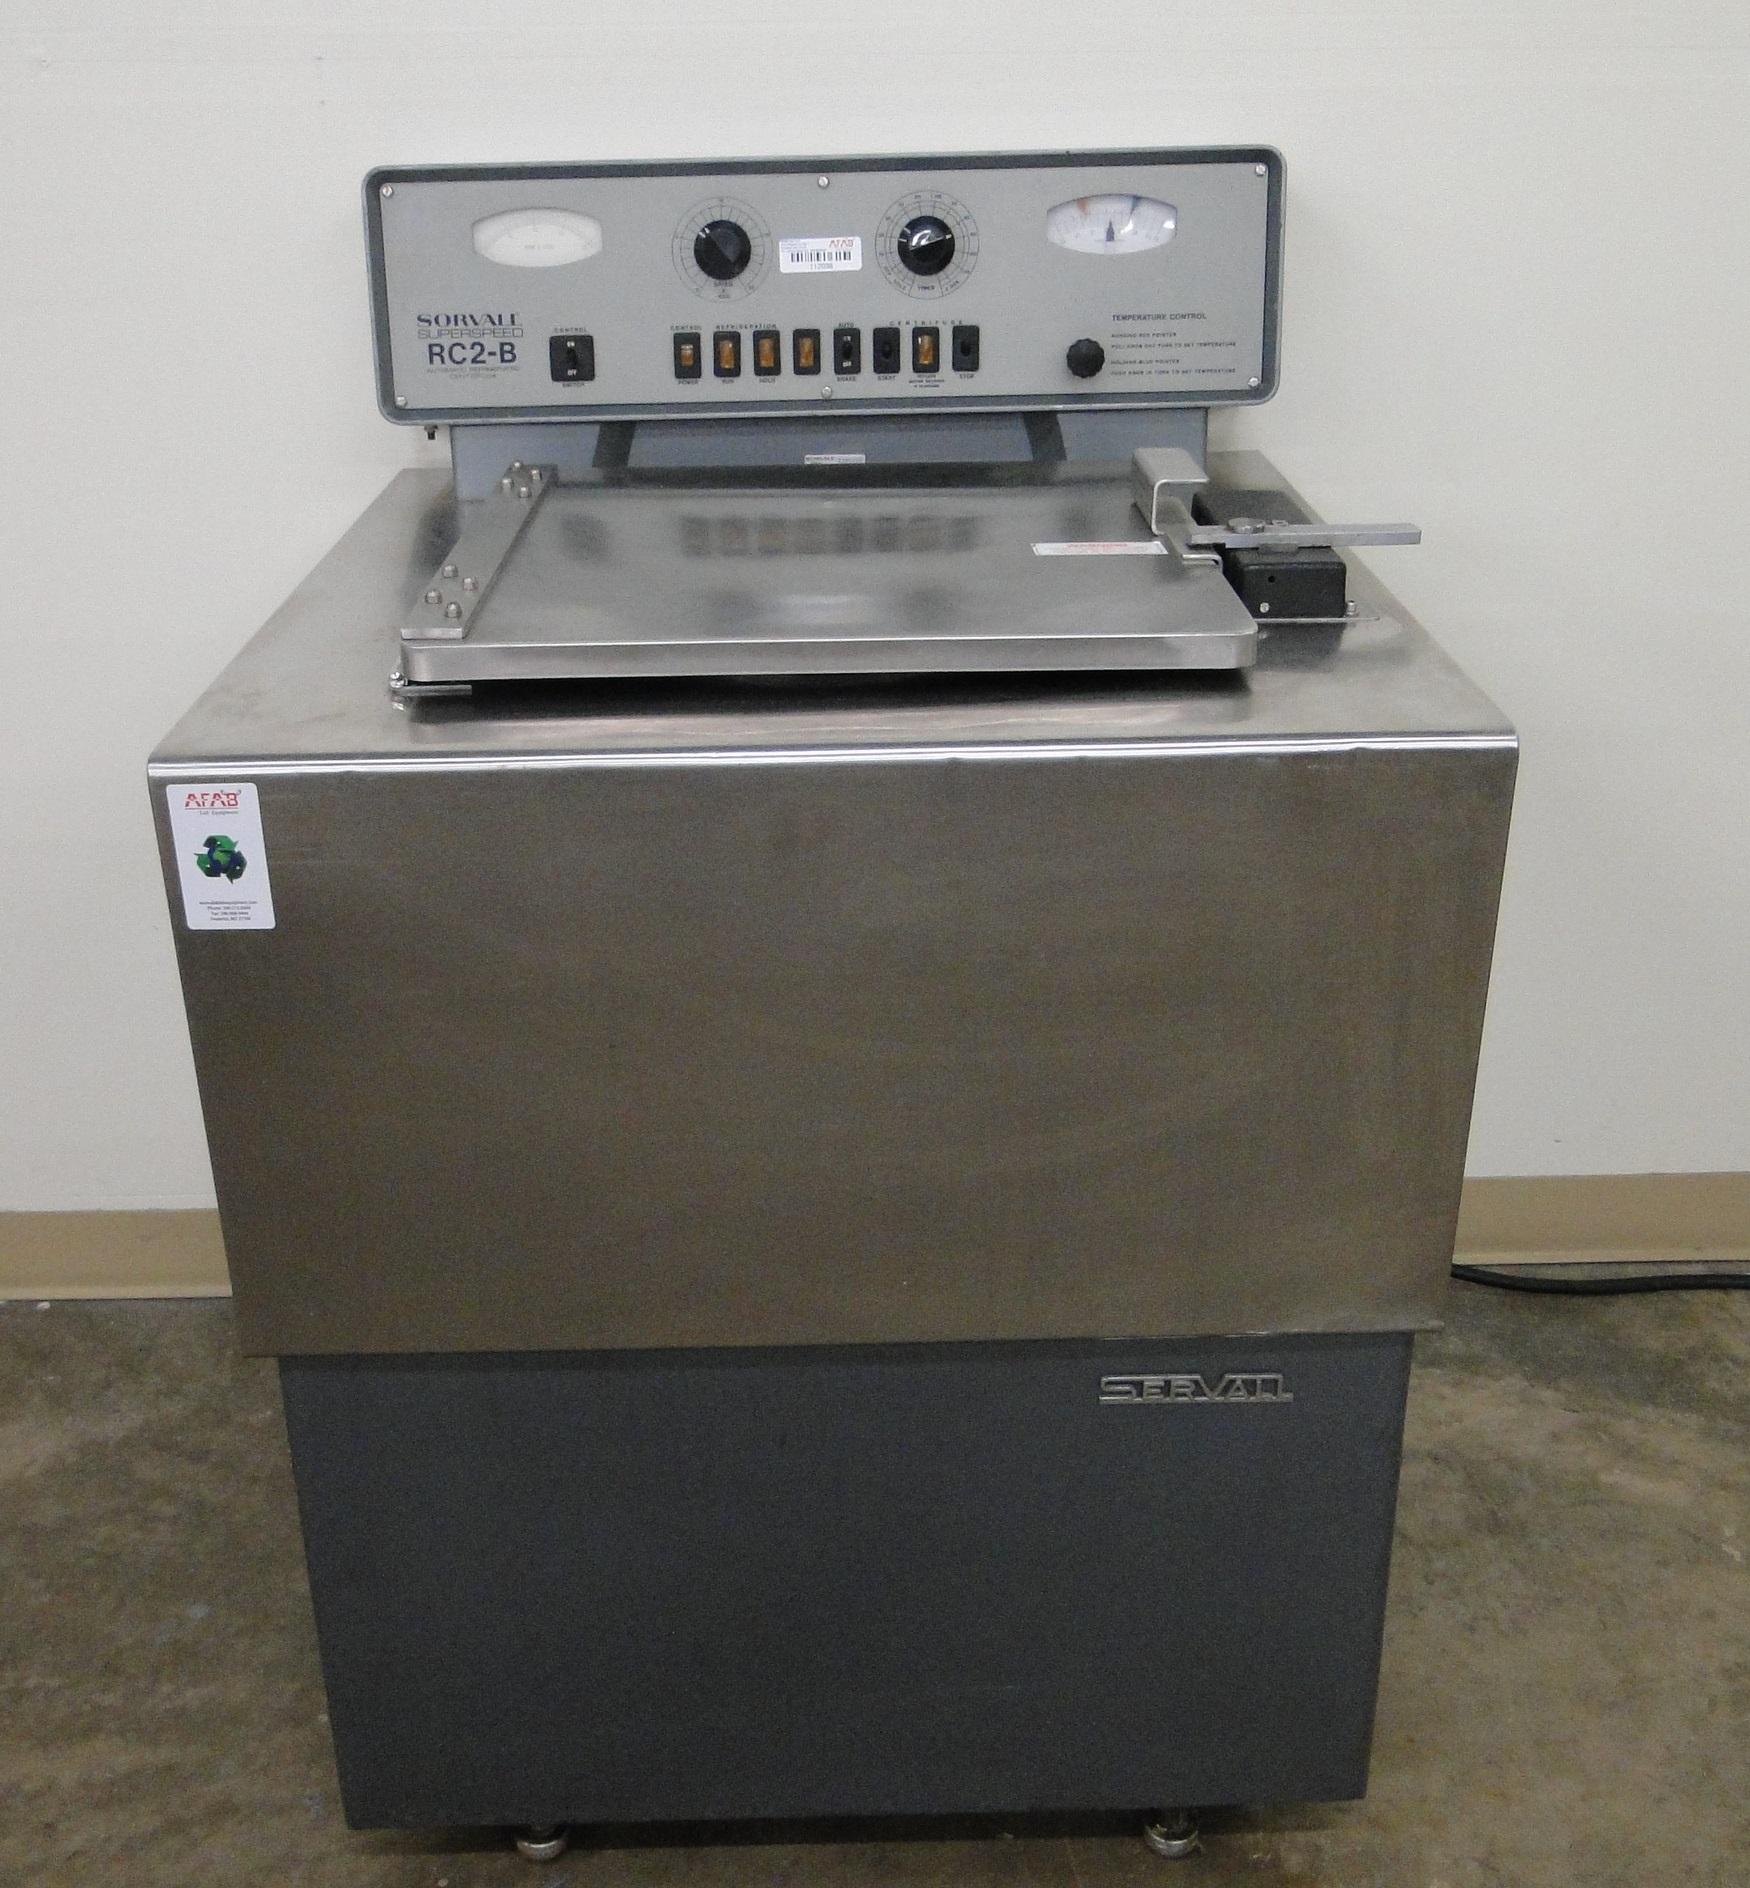 Foto Oem - rc2-b - Sorvall Superspeed Automatic Refrigerated Centrifuge ...